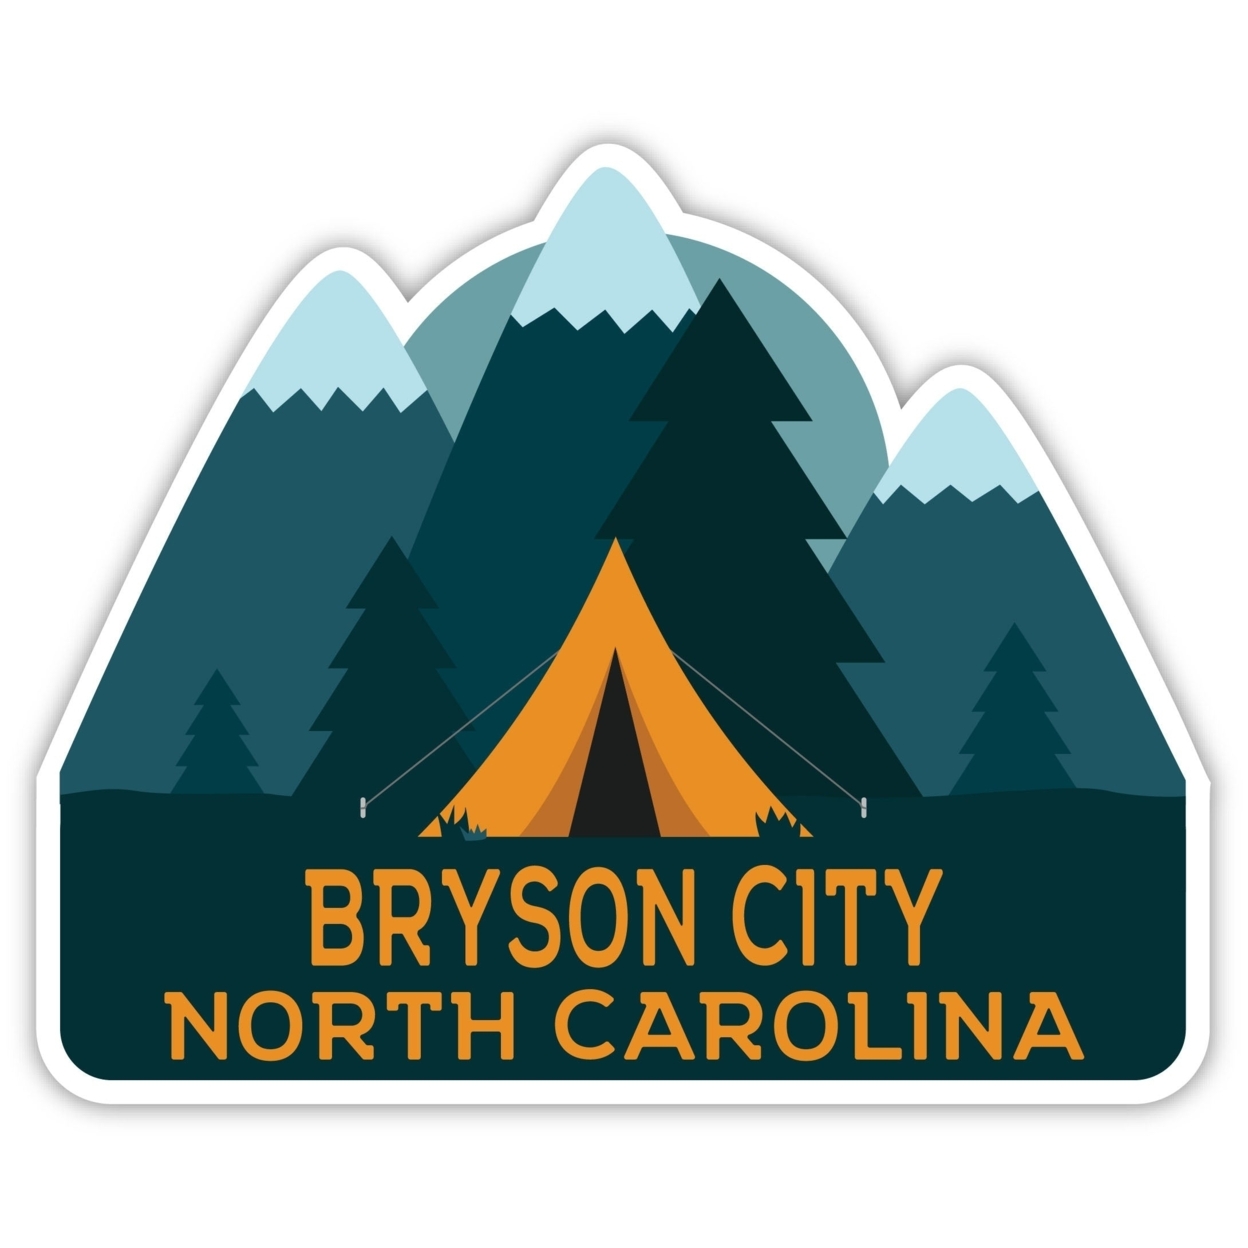 Bryson City North Carolina Souvenir Decorative Stickers (Choose Theme And Size) - 4-Pack, 8-Inch, Adventures Awaits